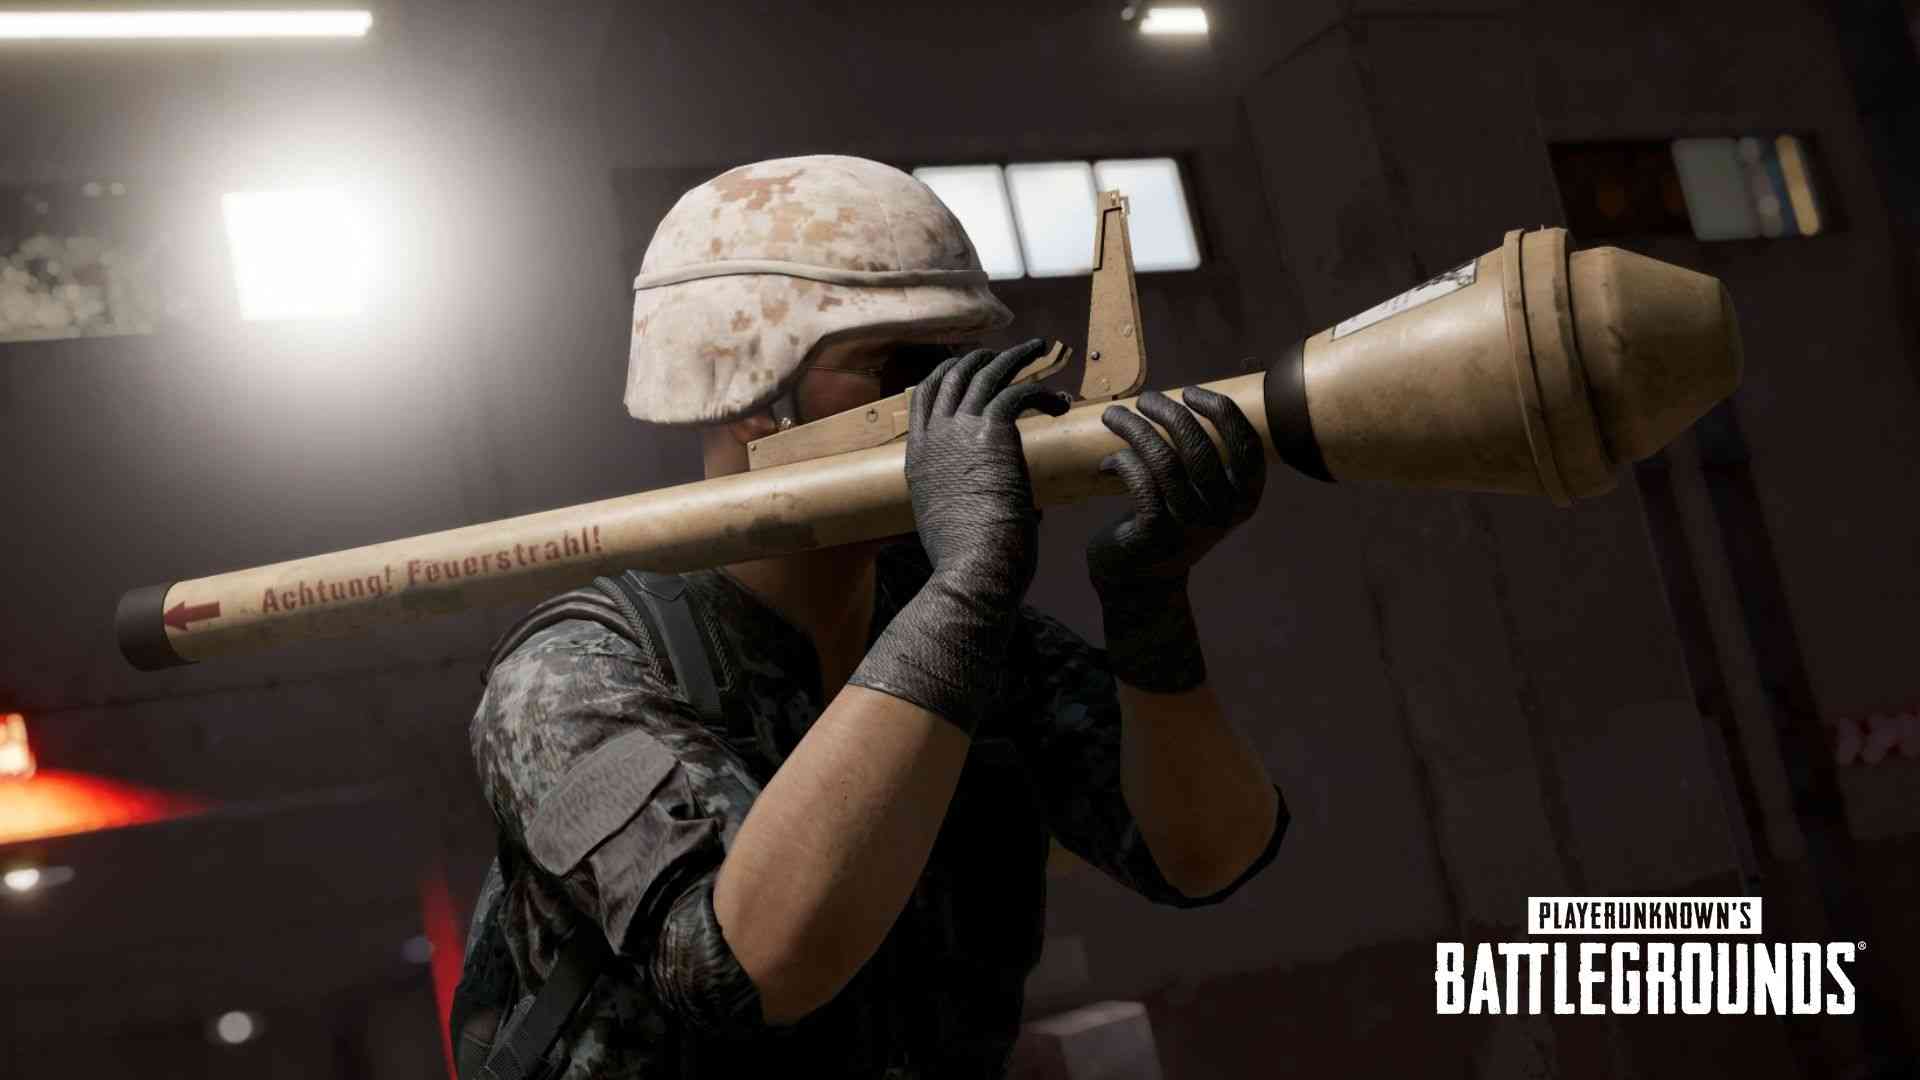 panzerfaust is added to pubg 3938 big 1